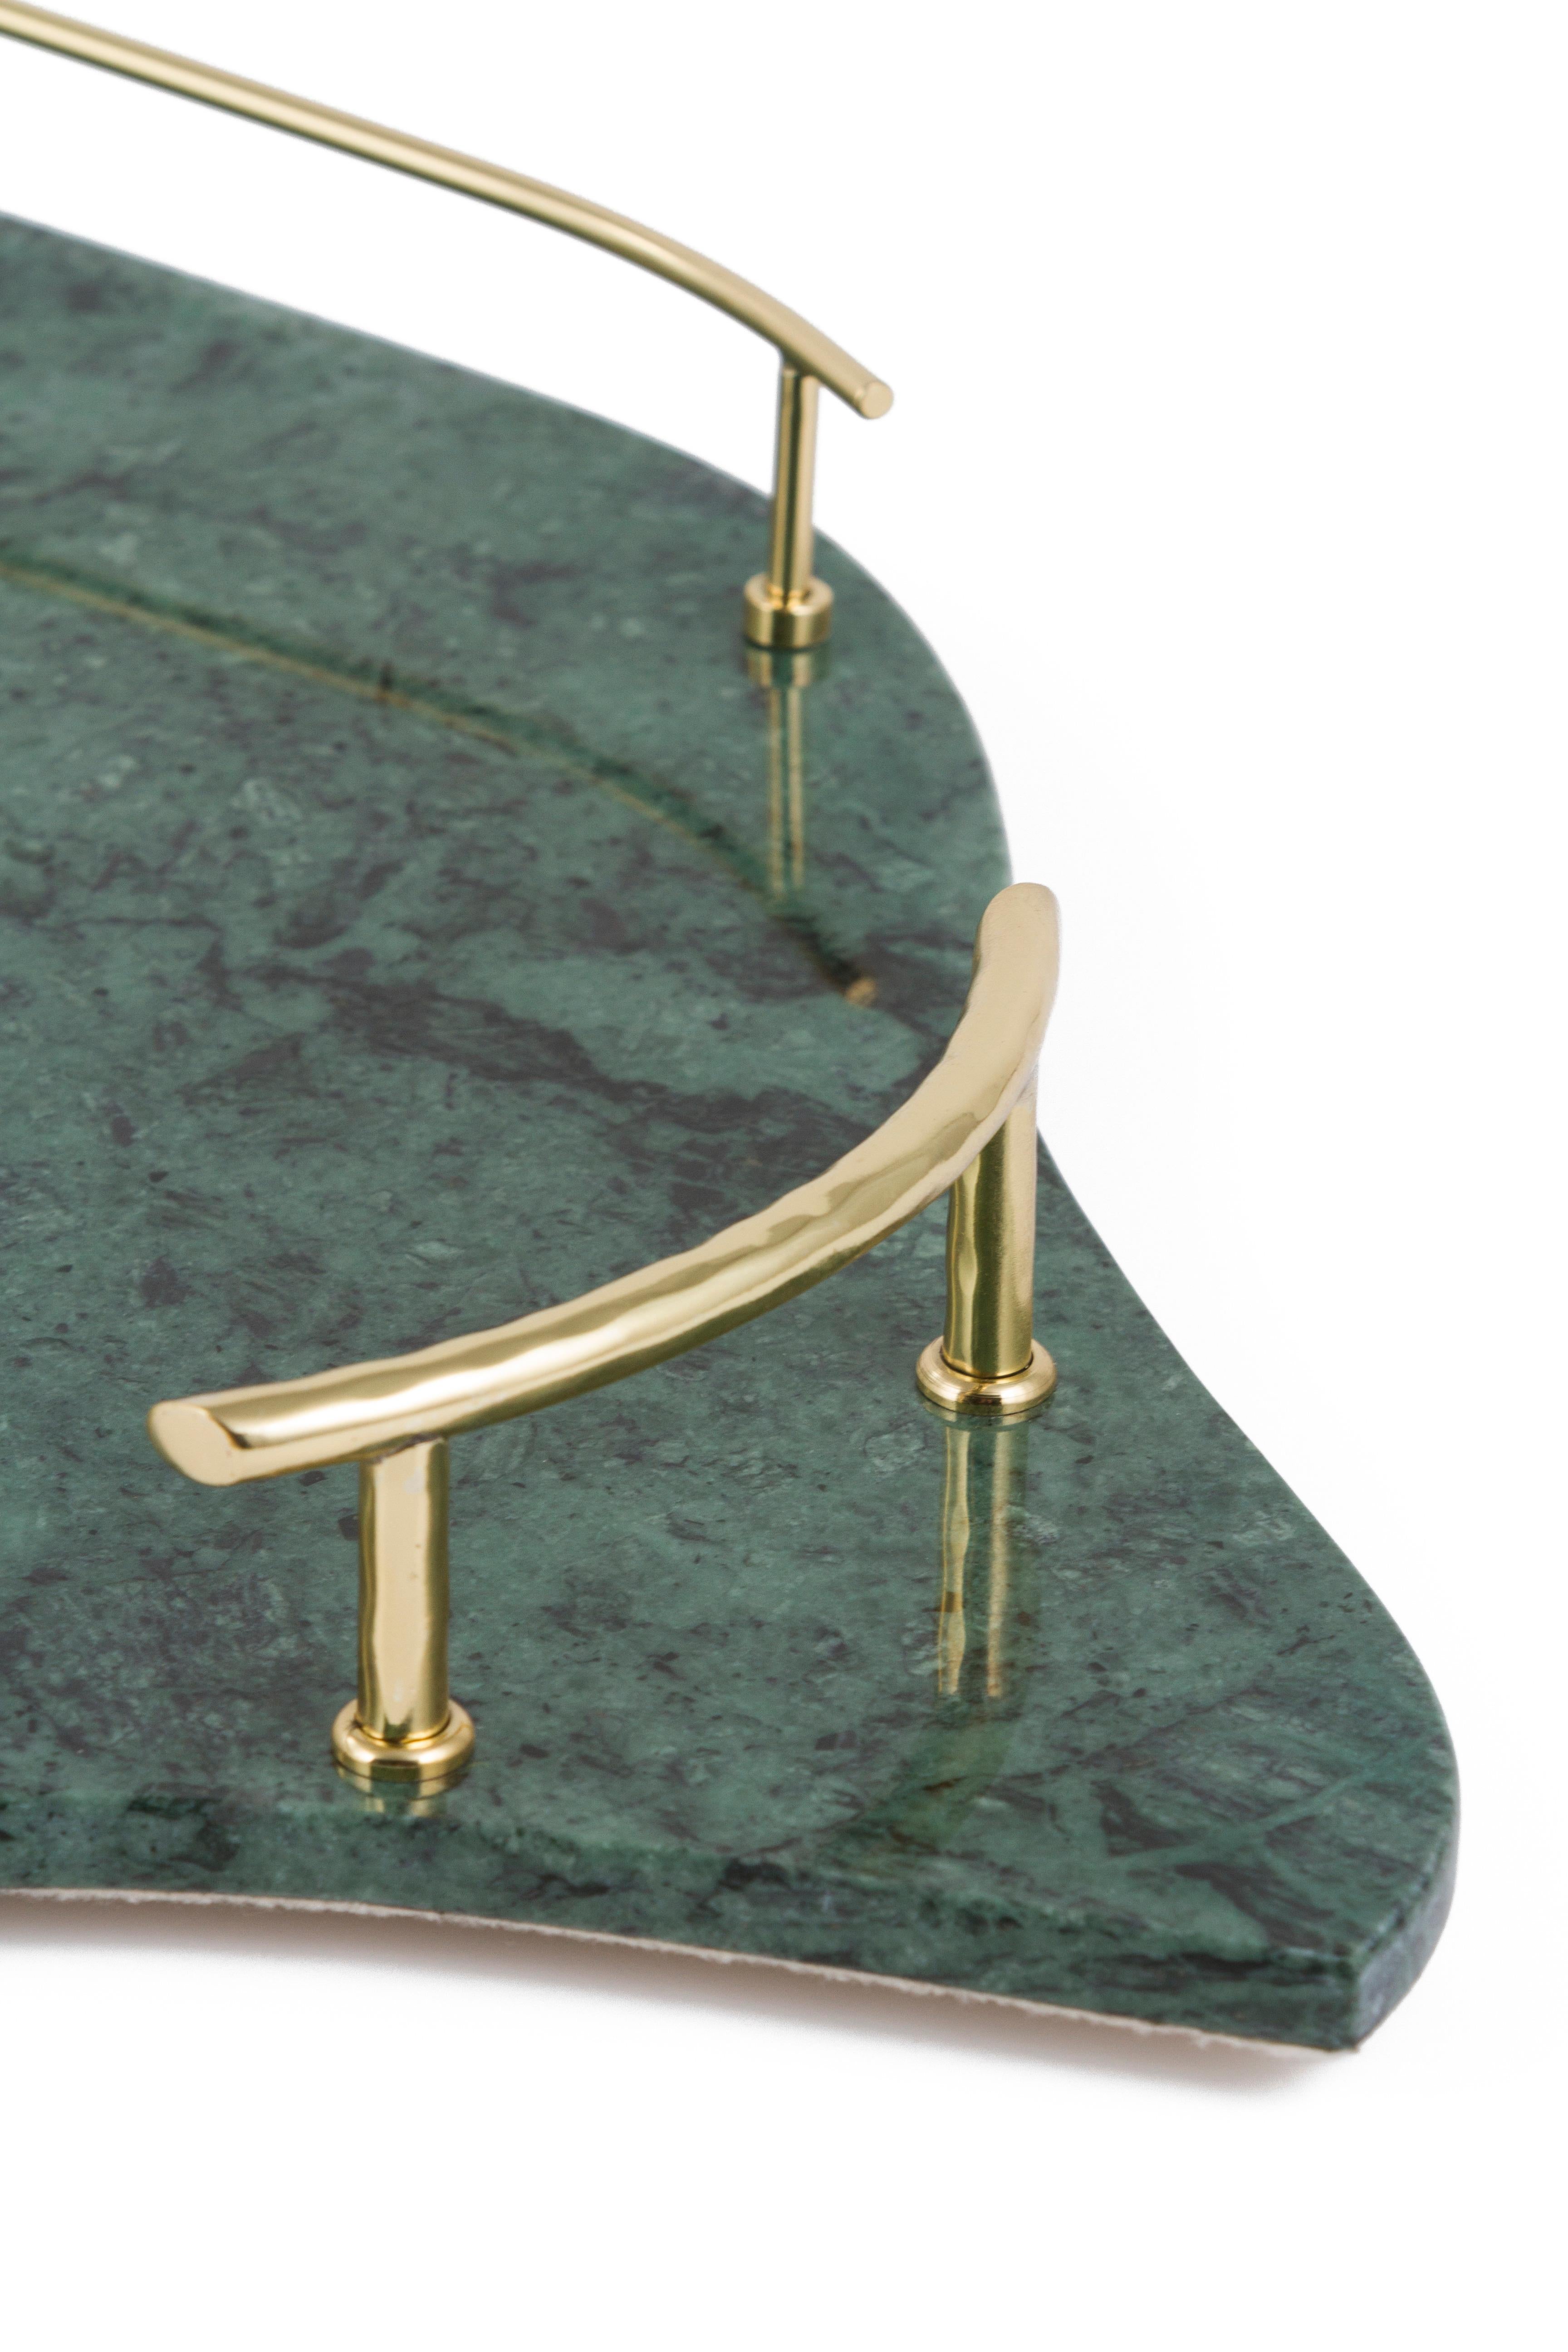 Serving Tray Sakai, Lusitanus Home Collection, Handcrafted in Portugal - Europe by Lusitanus Home.

A sublime serving tray, Sakai was design to uplift layback moments. An organic-shape serving tray in Green Guatemala marble with brass handles in